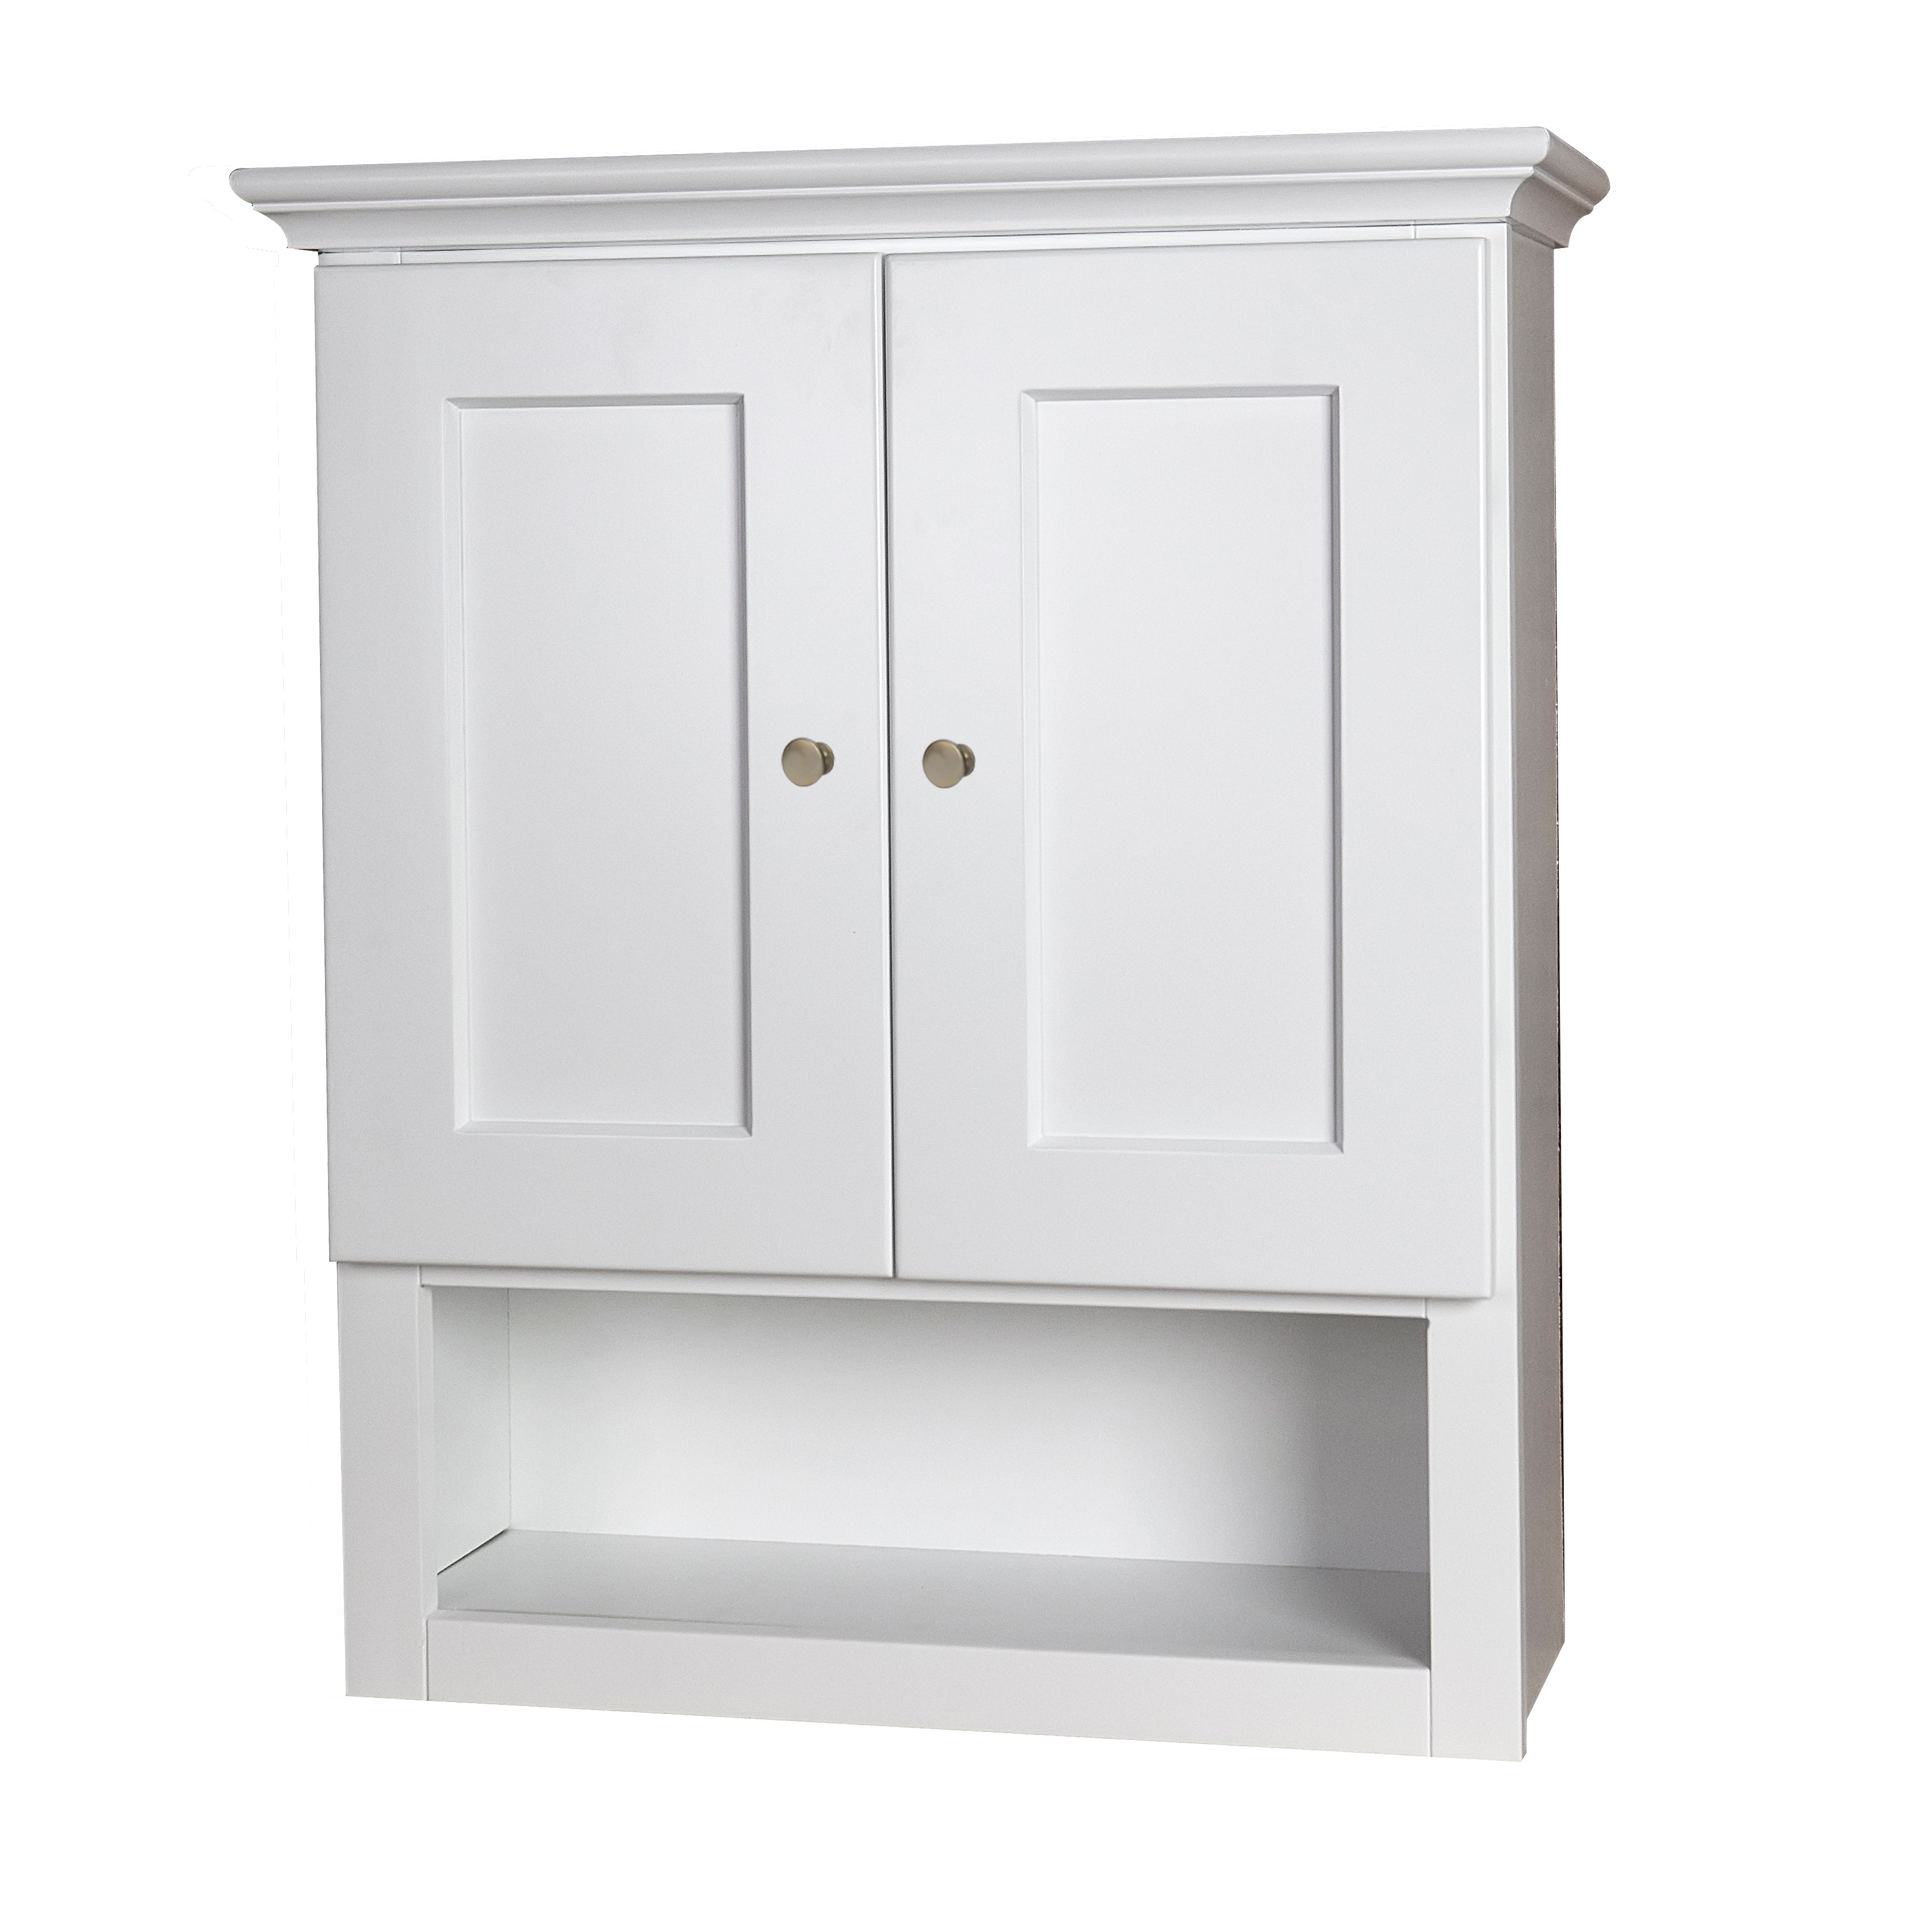 Shop White Shaker Bathroom Wall Cabinet On Sale Overstock 21010187